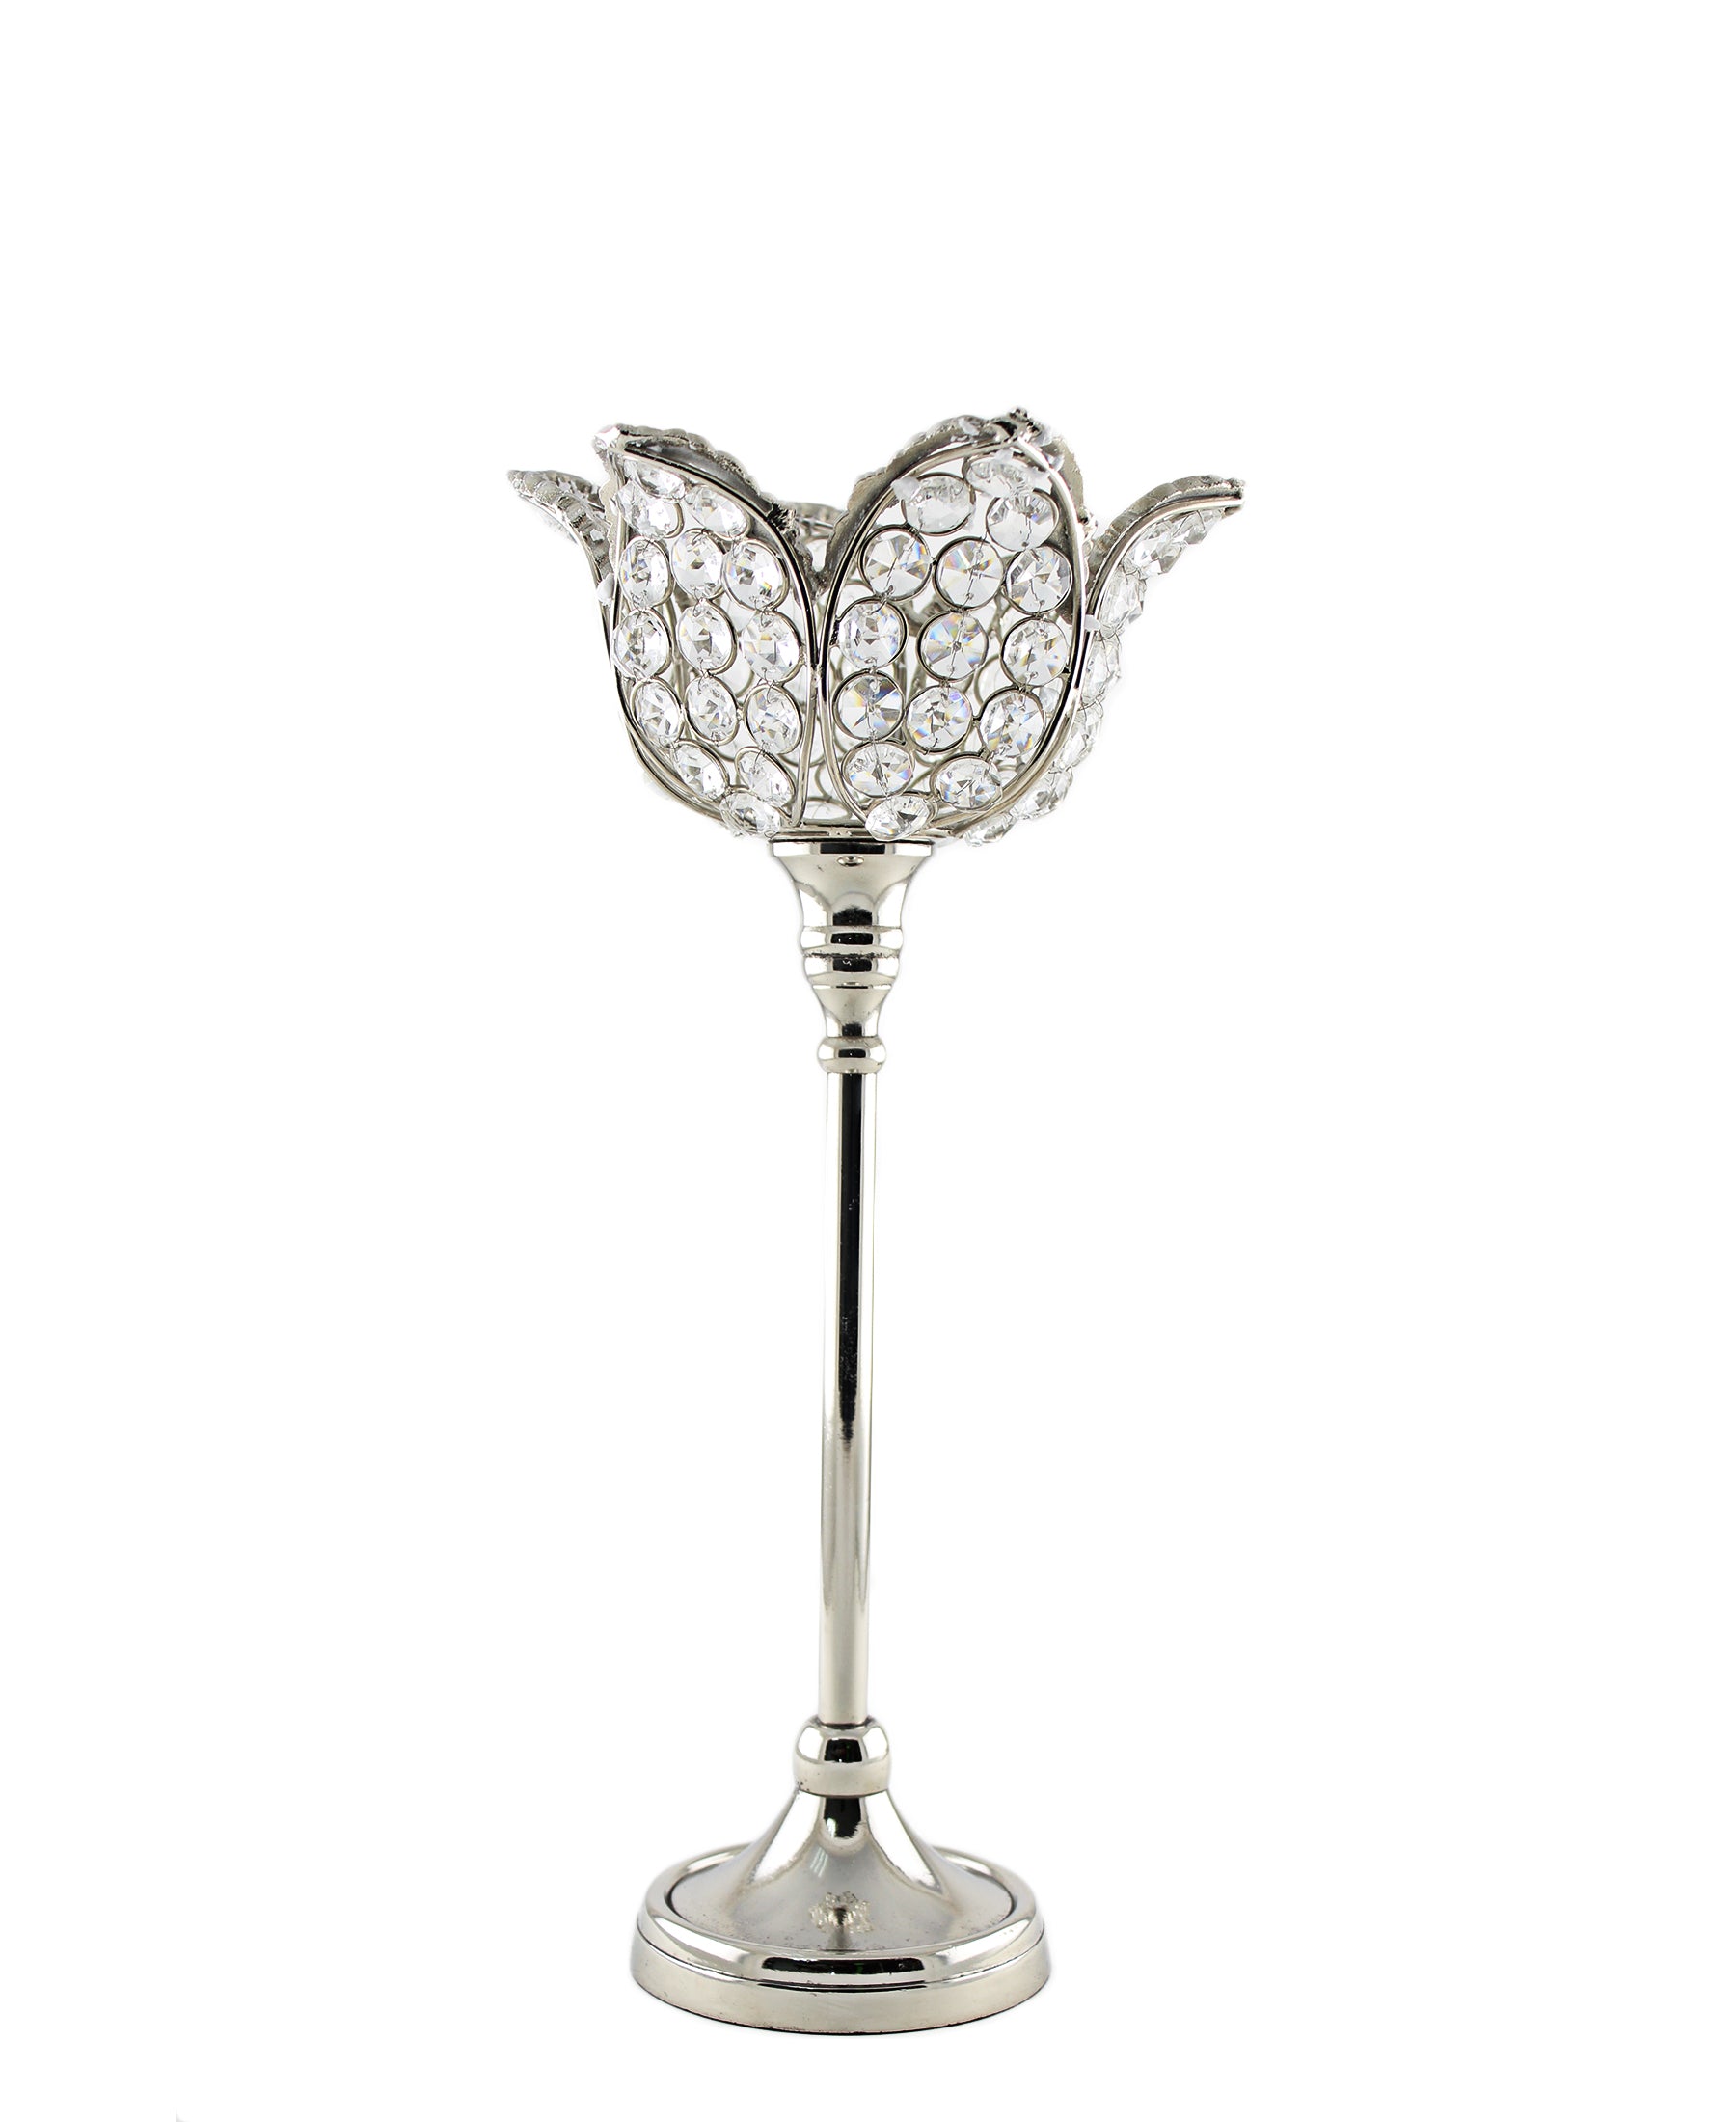 Majestic Candle Holder Tulip Shaped - Silver